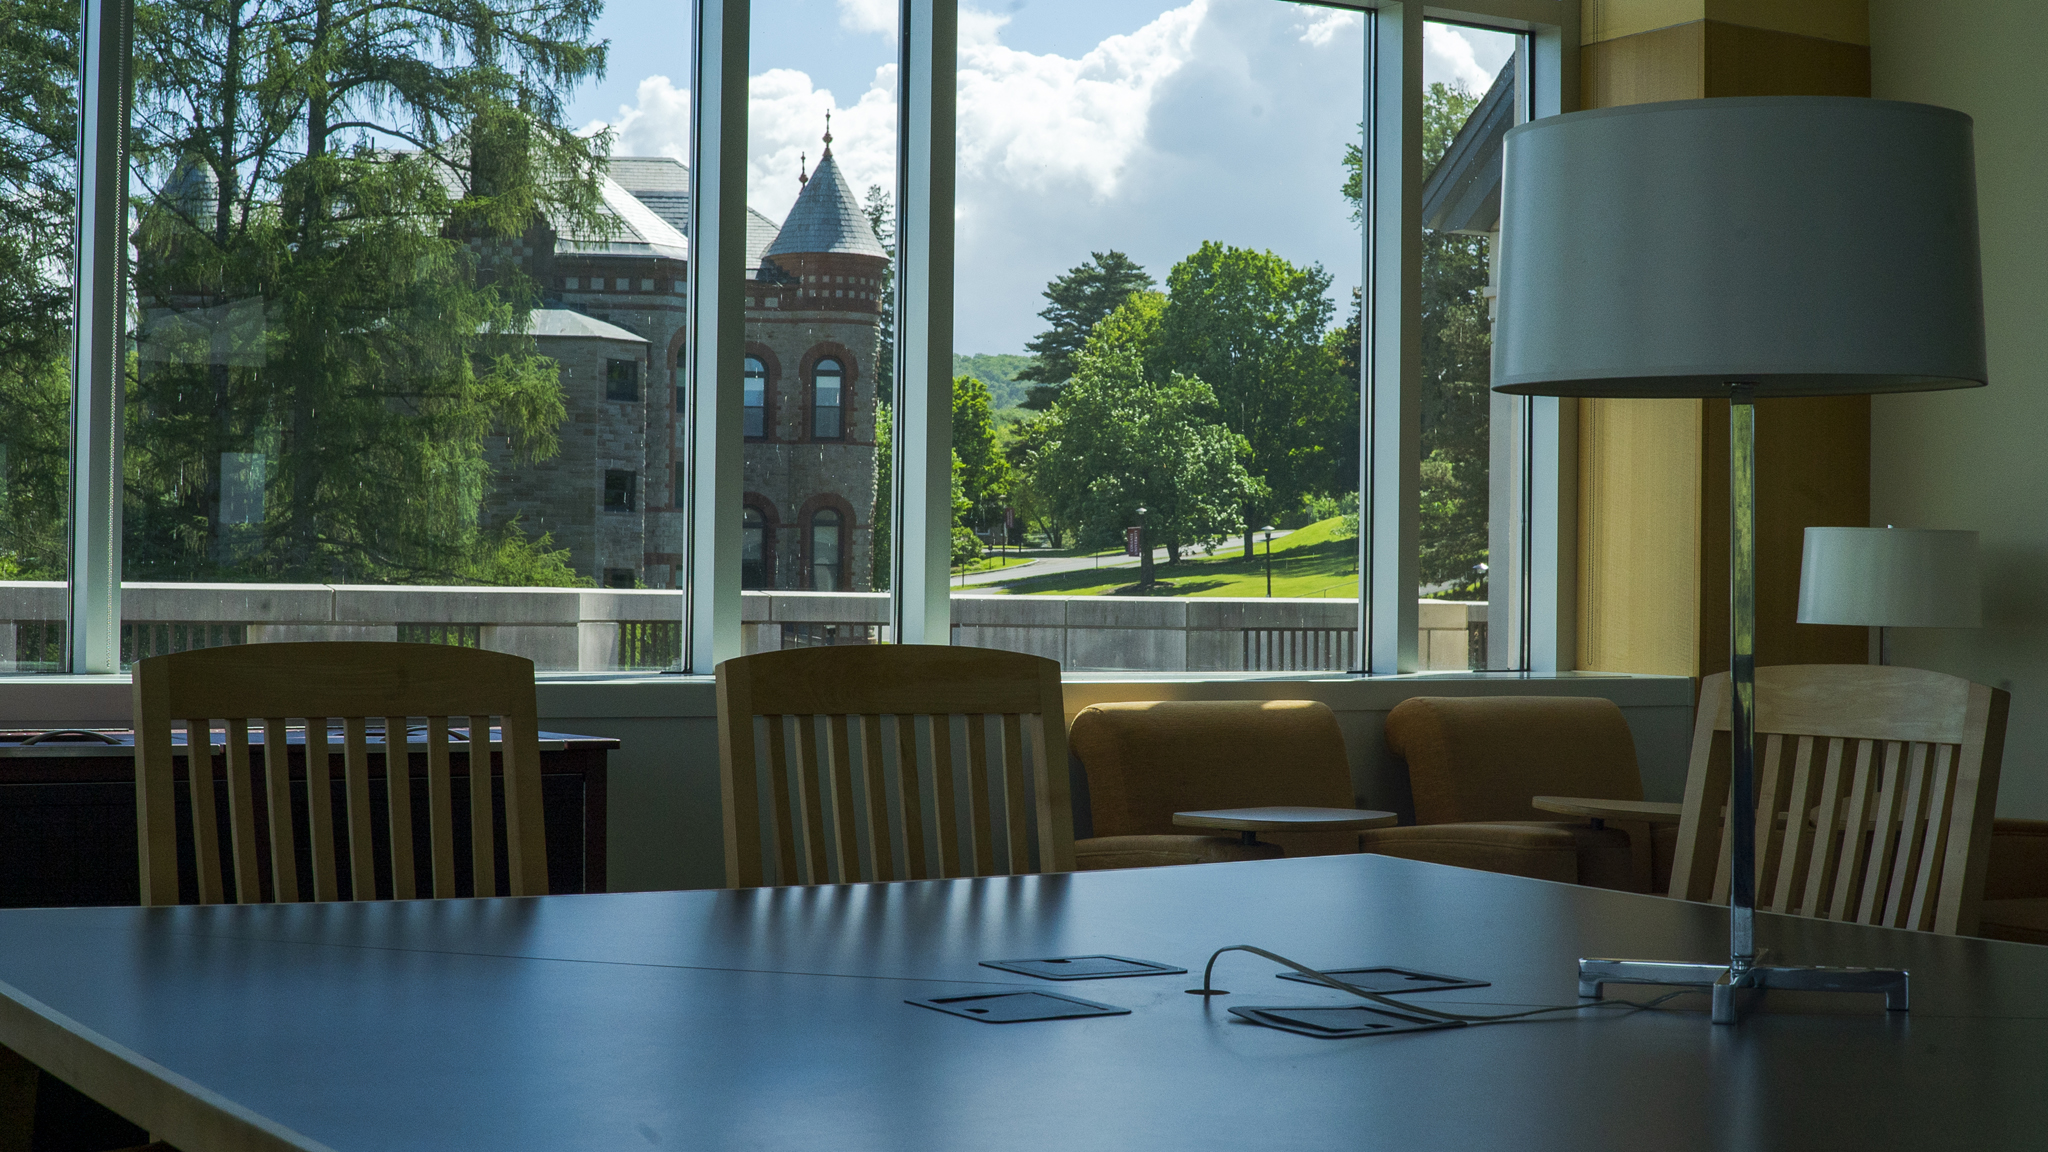 Case-Geyer study room and window looking at JBC